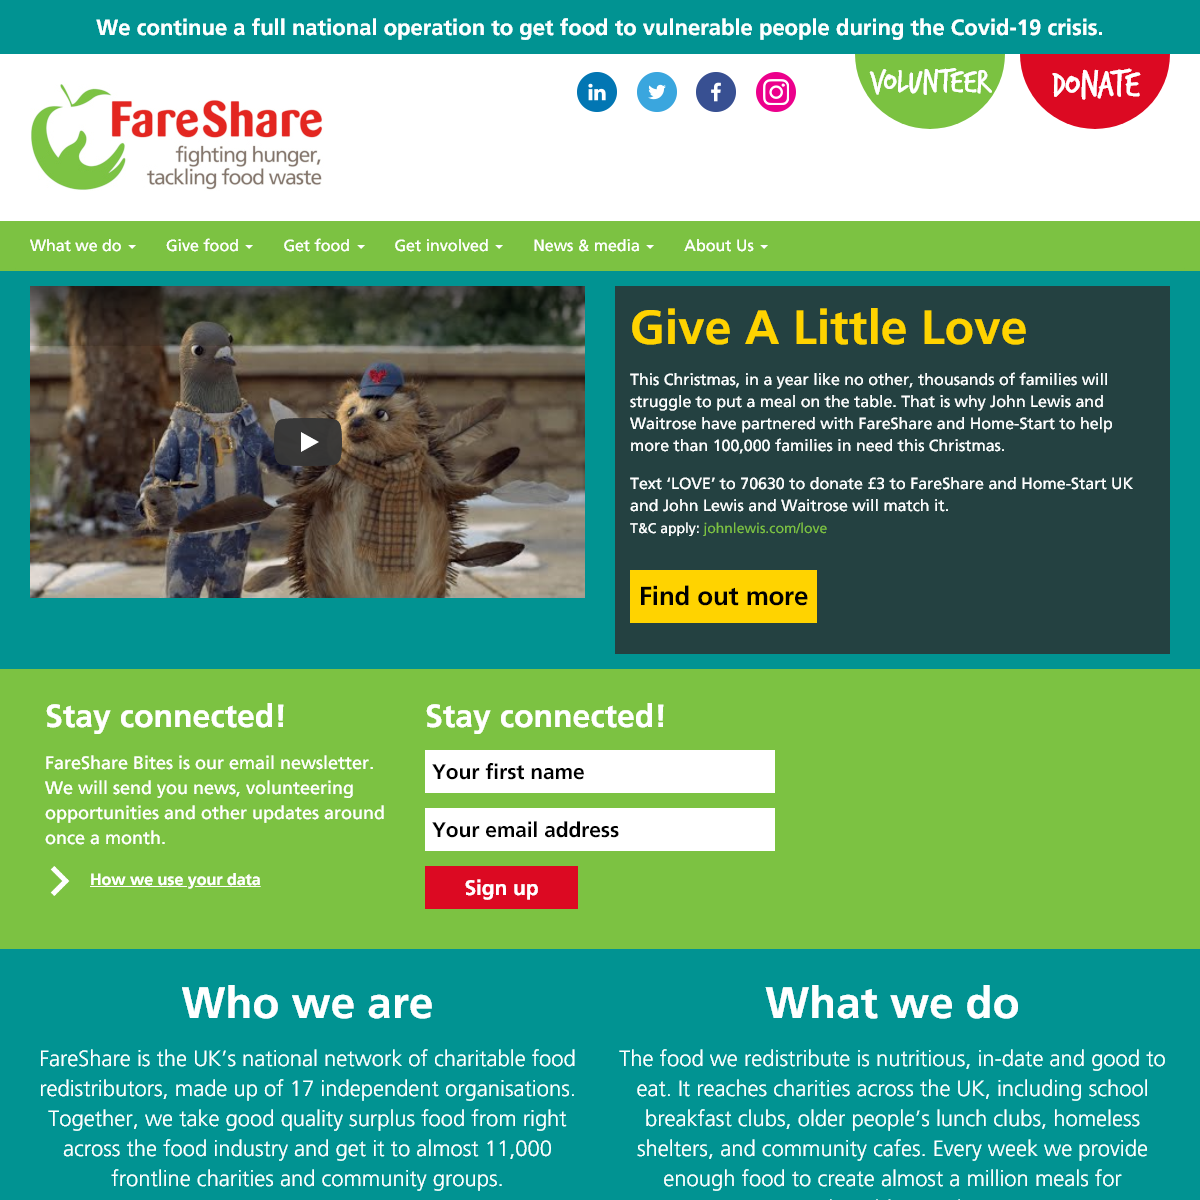 A complete backup of fareshare.org.uk